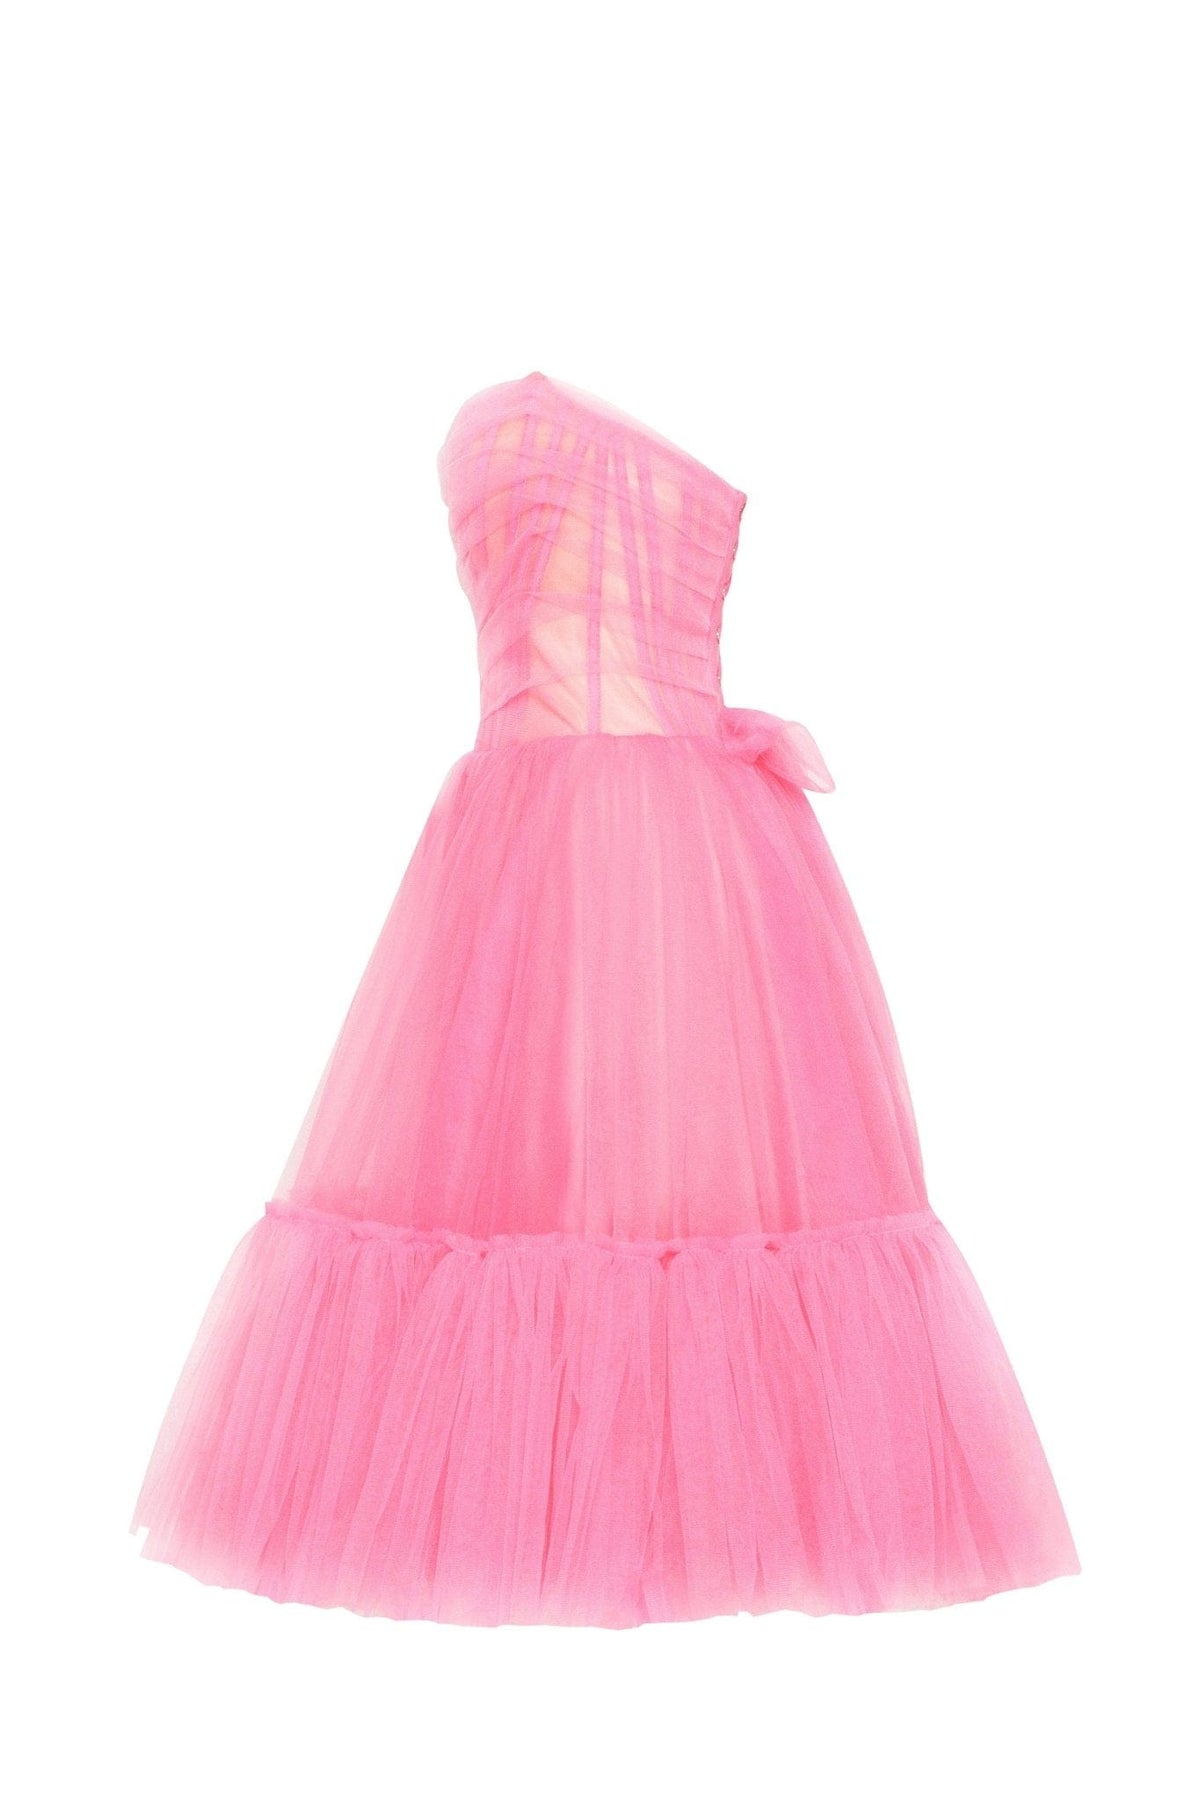 All-In-Pink bustier tulle dress Milla Dresses - USA, Worldwide delivery